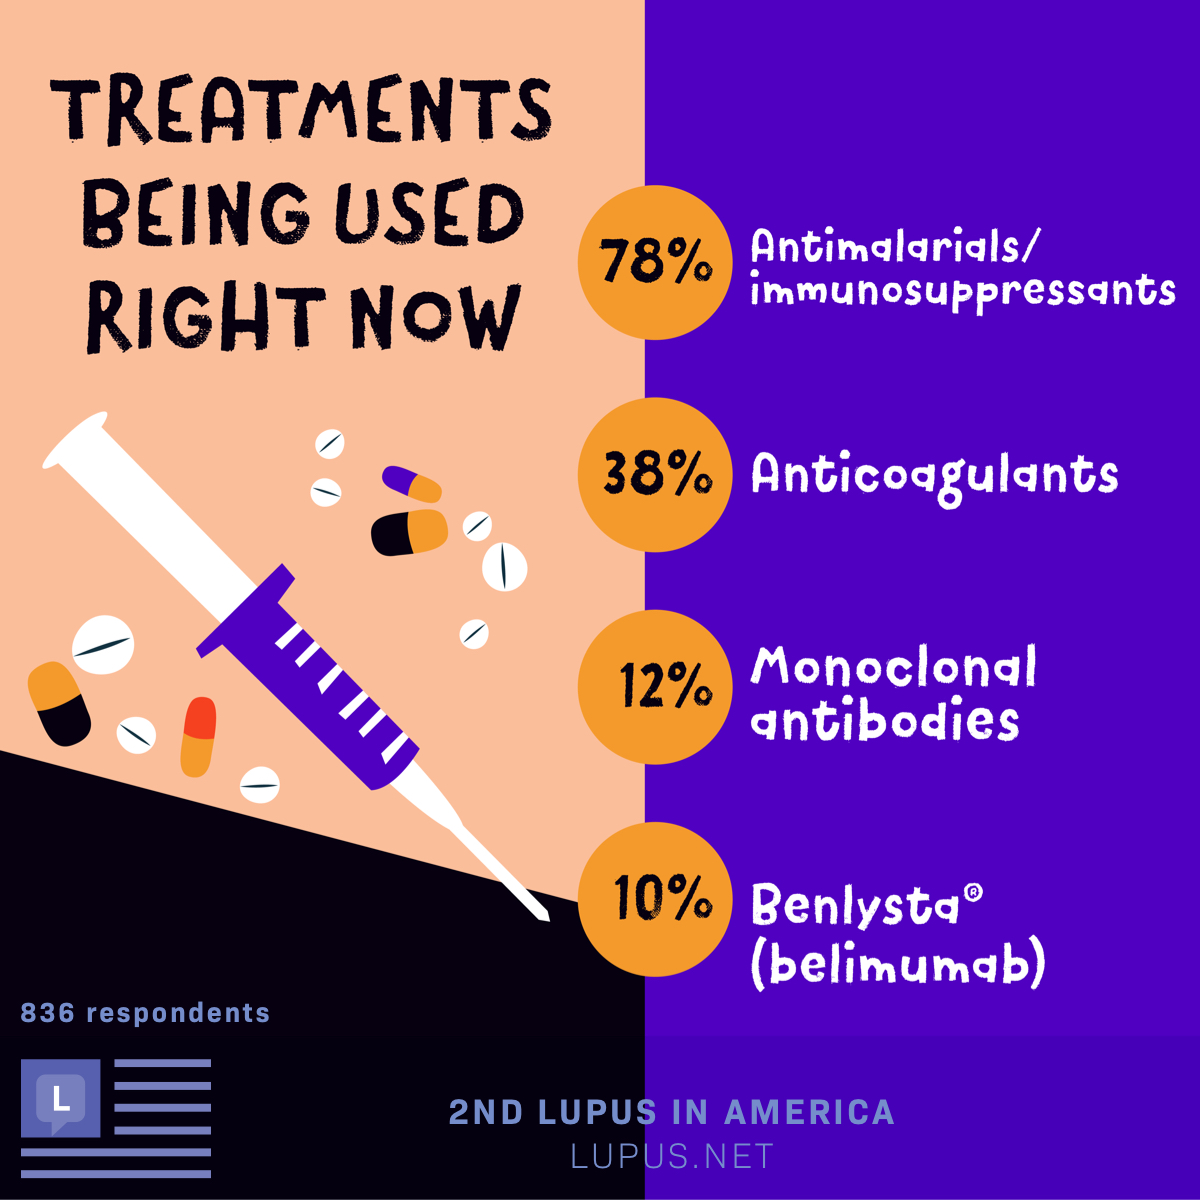 Treatments being used by people living with lupus include antimalarials, immunosuppressants, anticoagulants, monoclonal antibodies, and Benlysta® (belimumab).